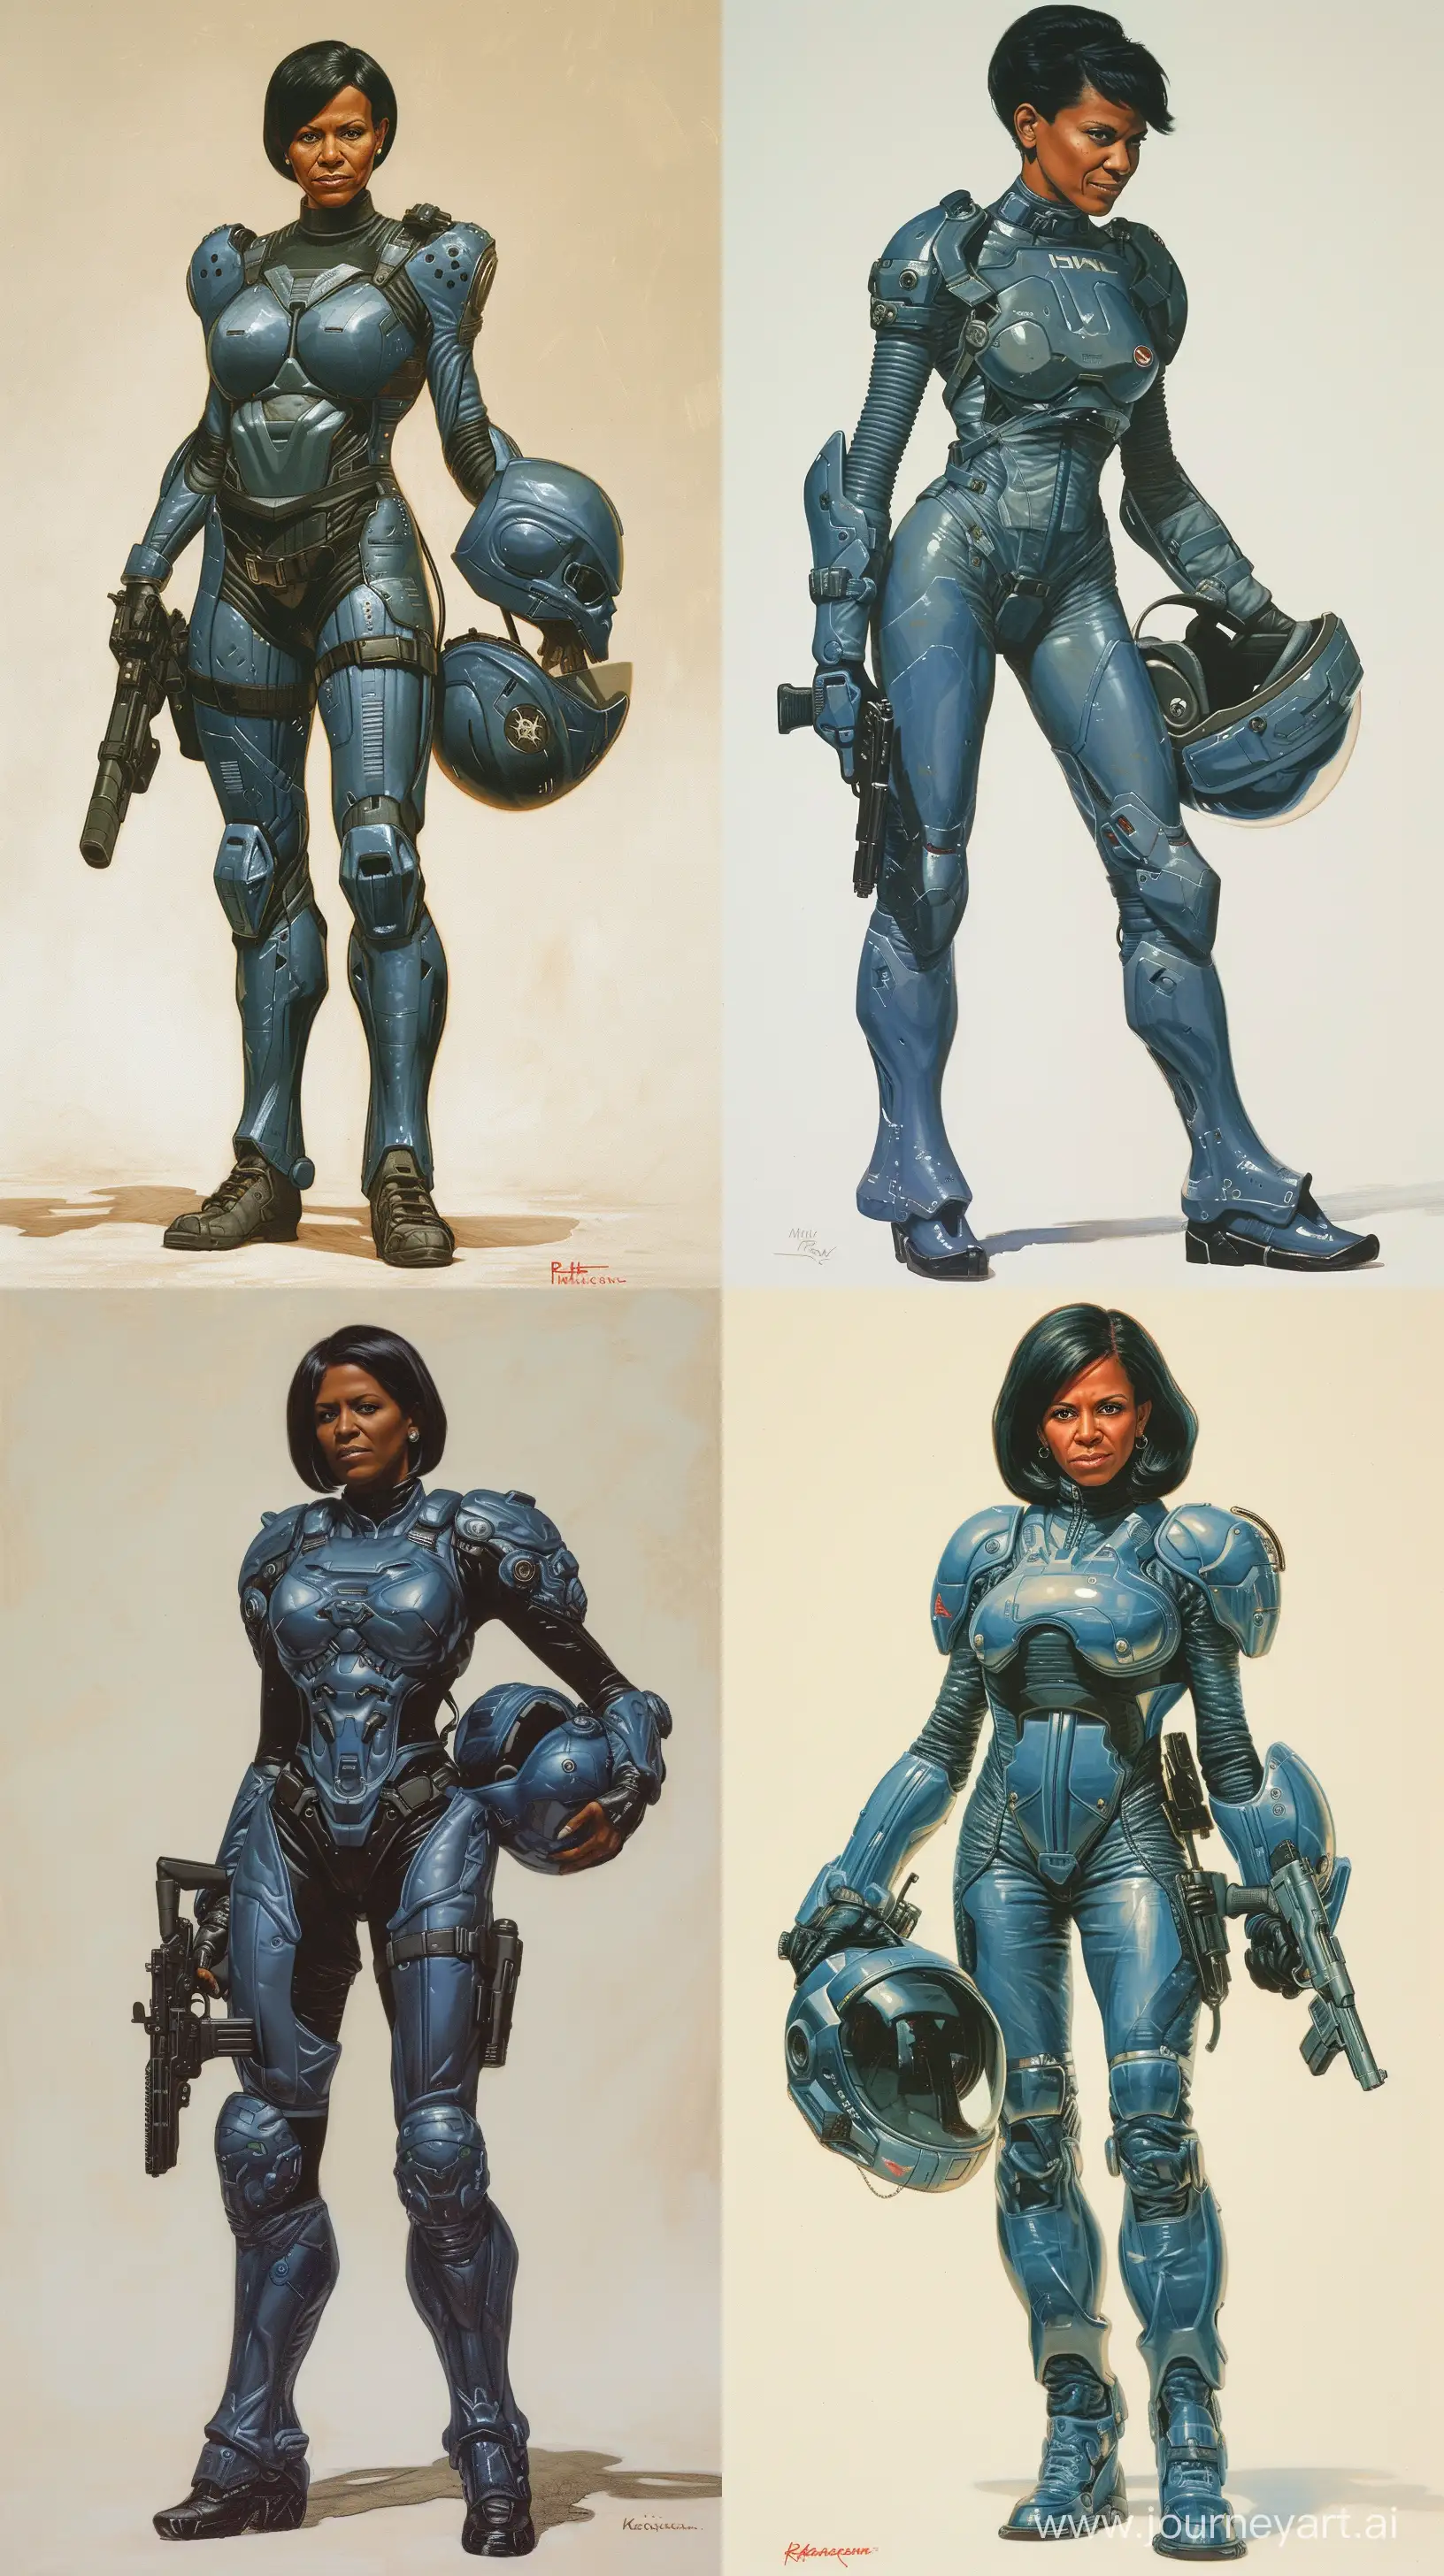 Futuristic-Michelle-Obama-in-Blue-Plated-Armor-by-Ralph-McQuarrie